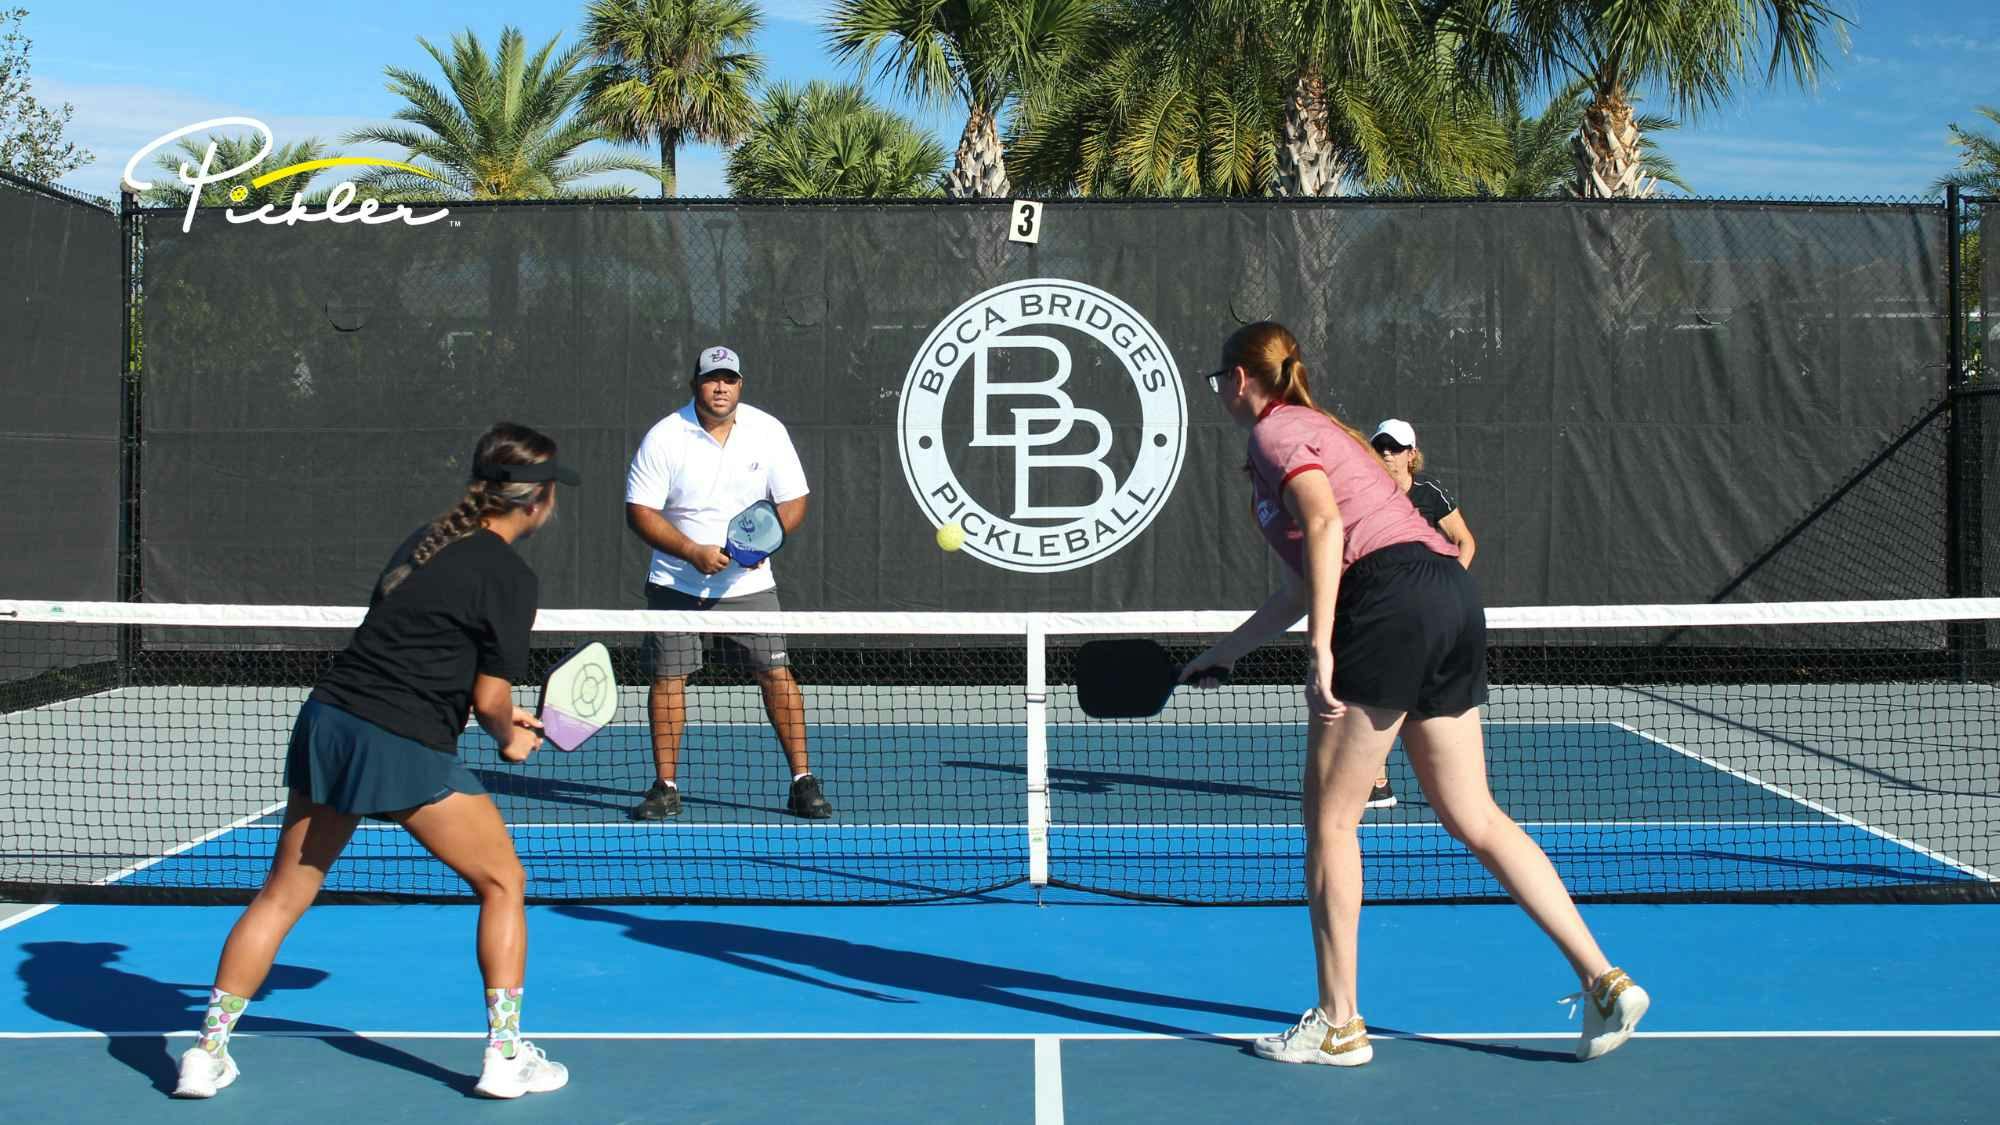 Try This Pickleball Strategy to Involve Your Partner When You Are Being Targeted